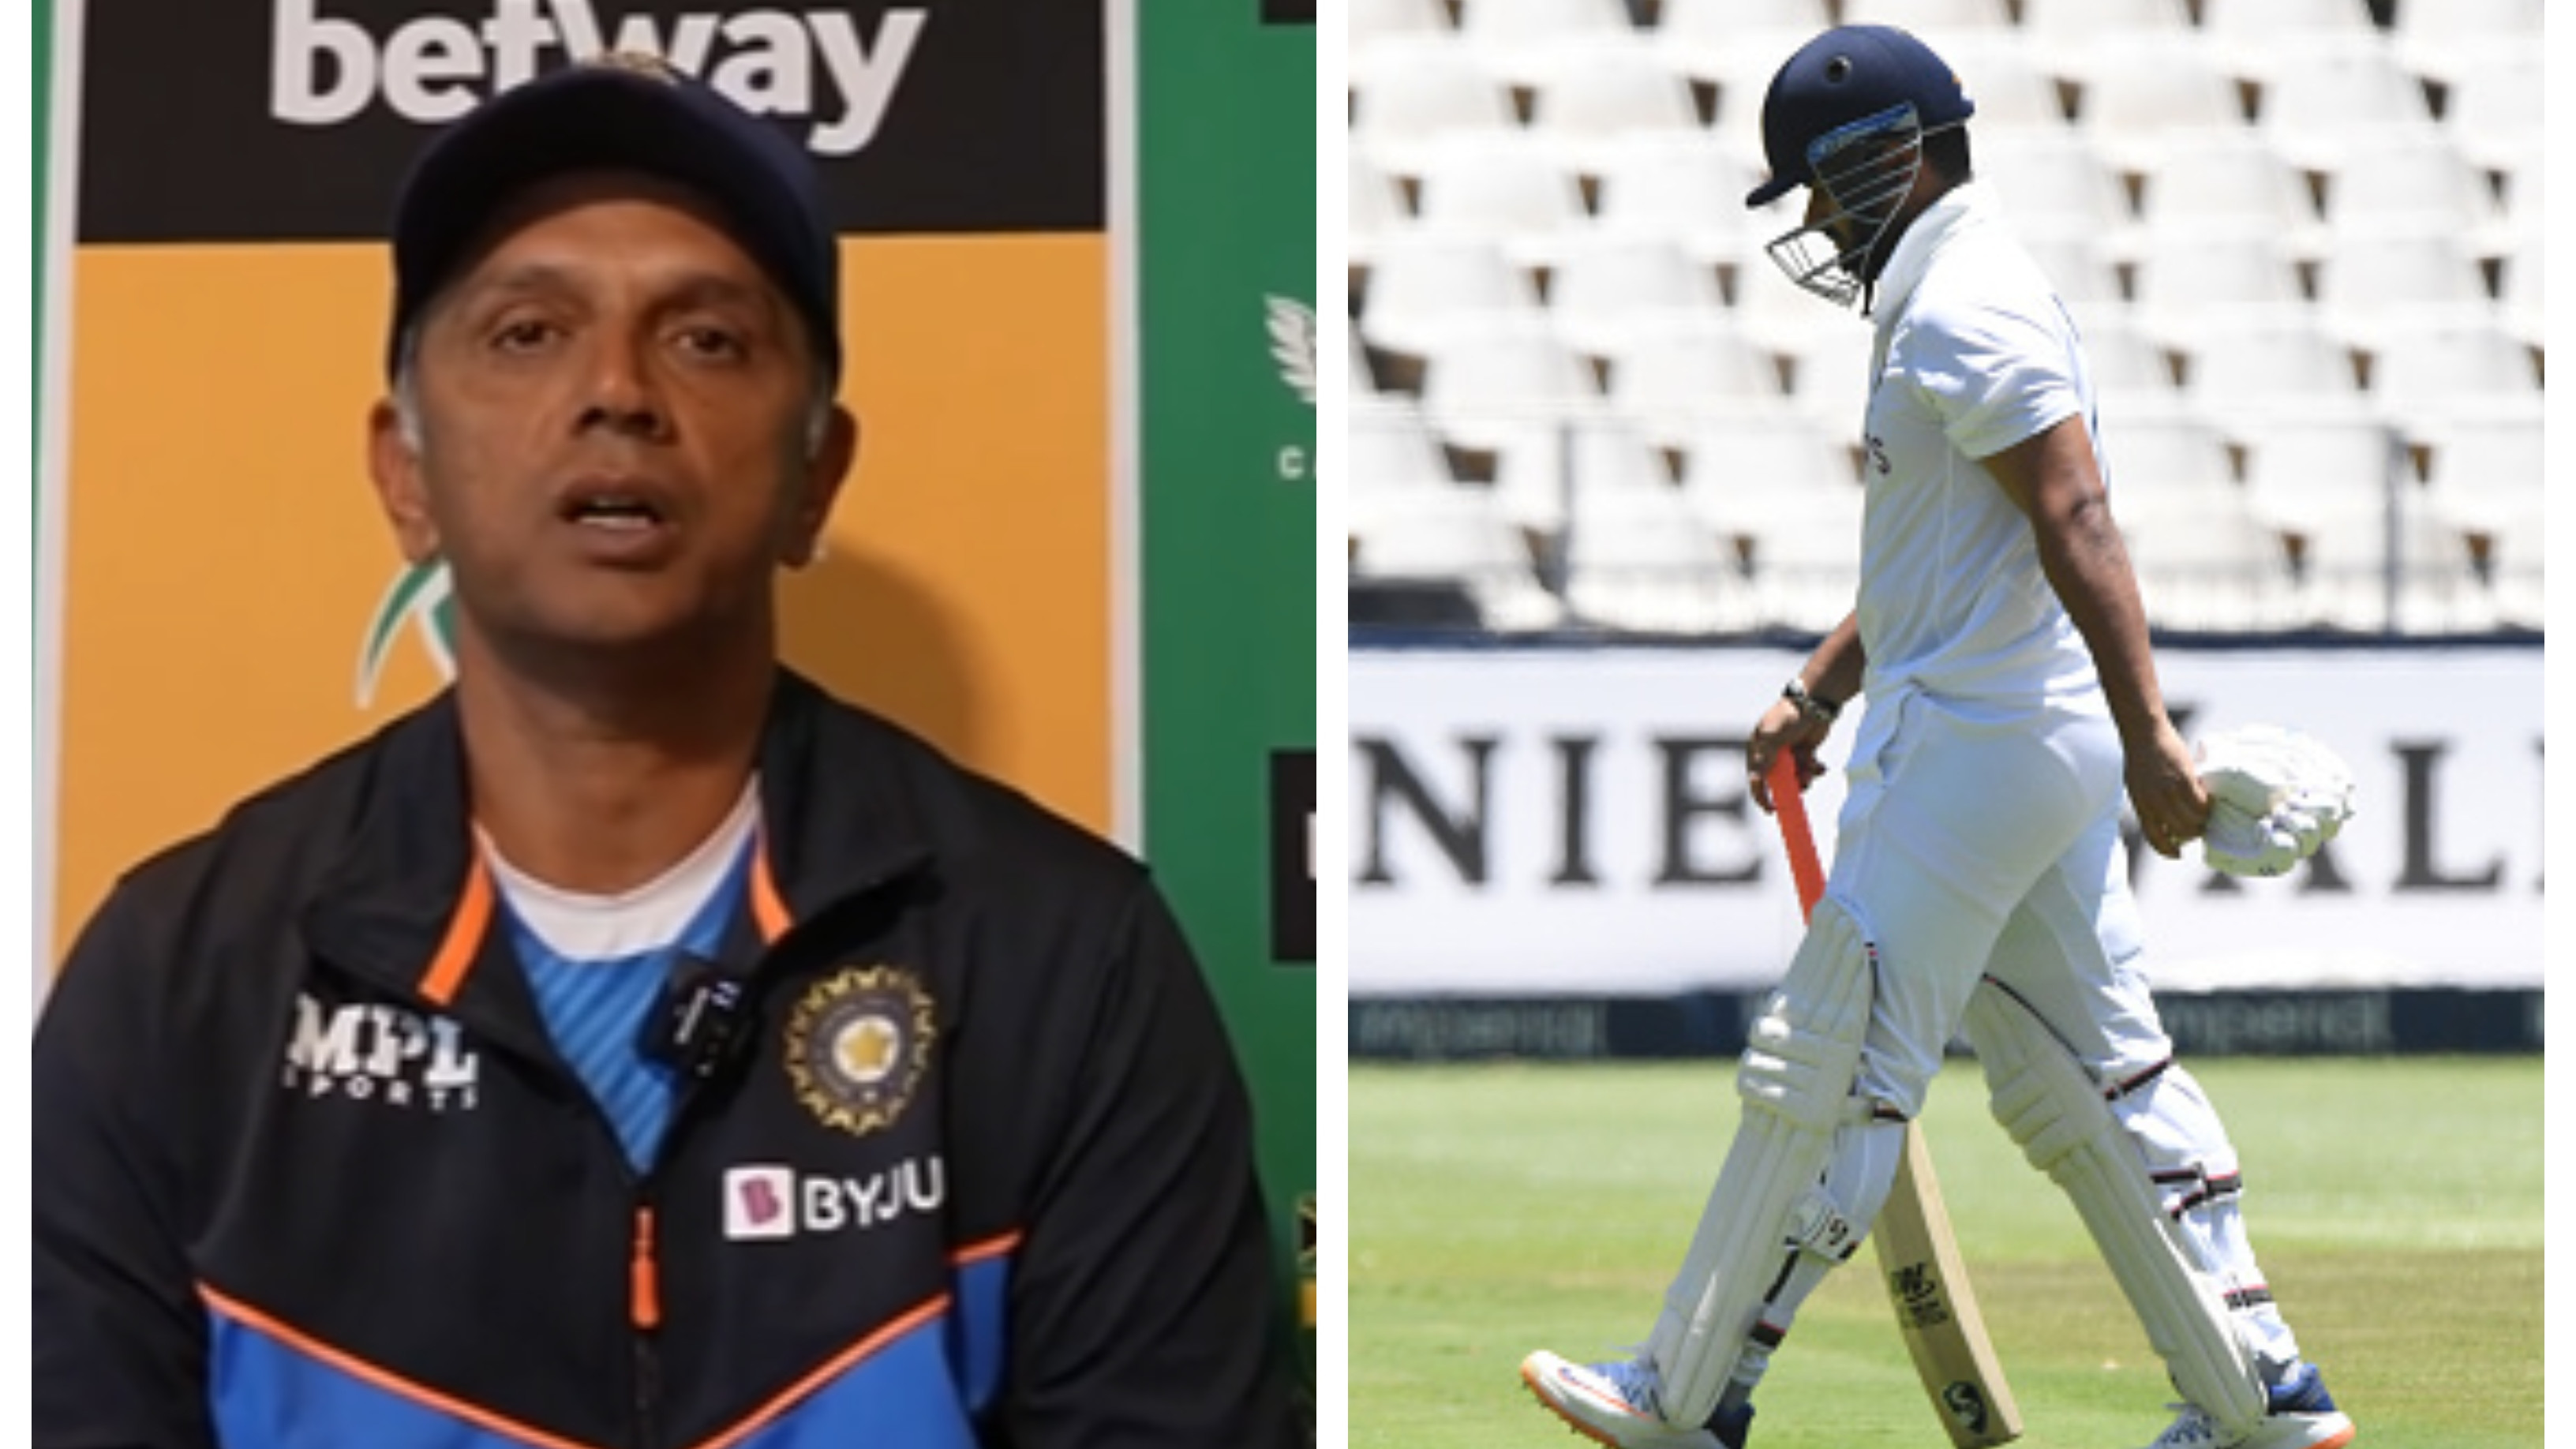 SA v IND 2021-22: Rahul Dravid opines on Rishabh Pant's shot selection, says management will have a chat